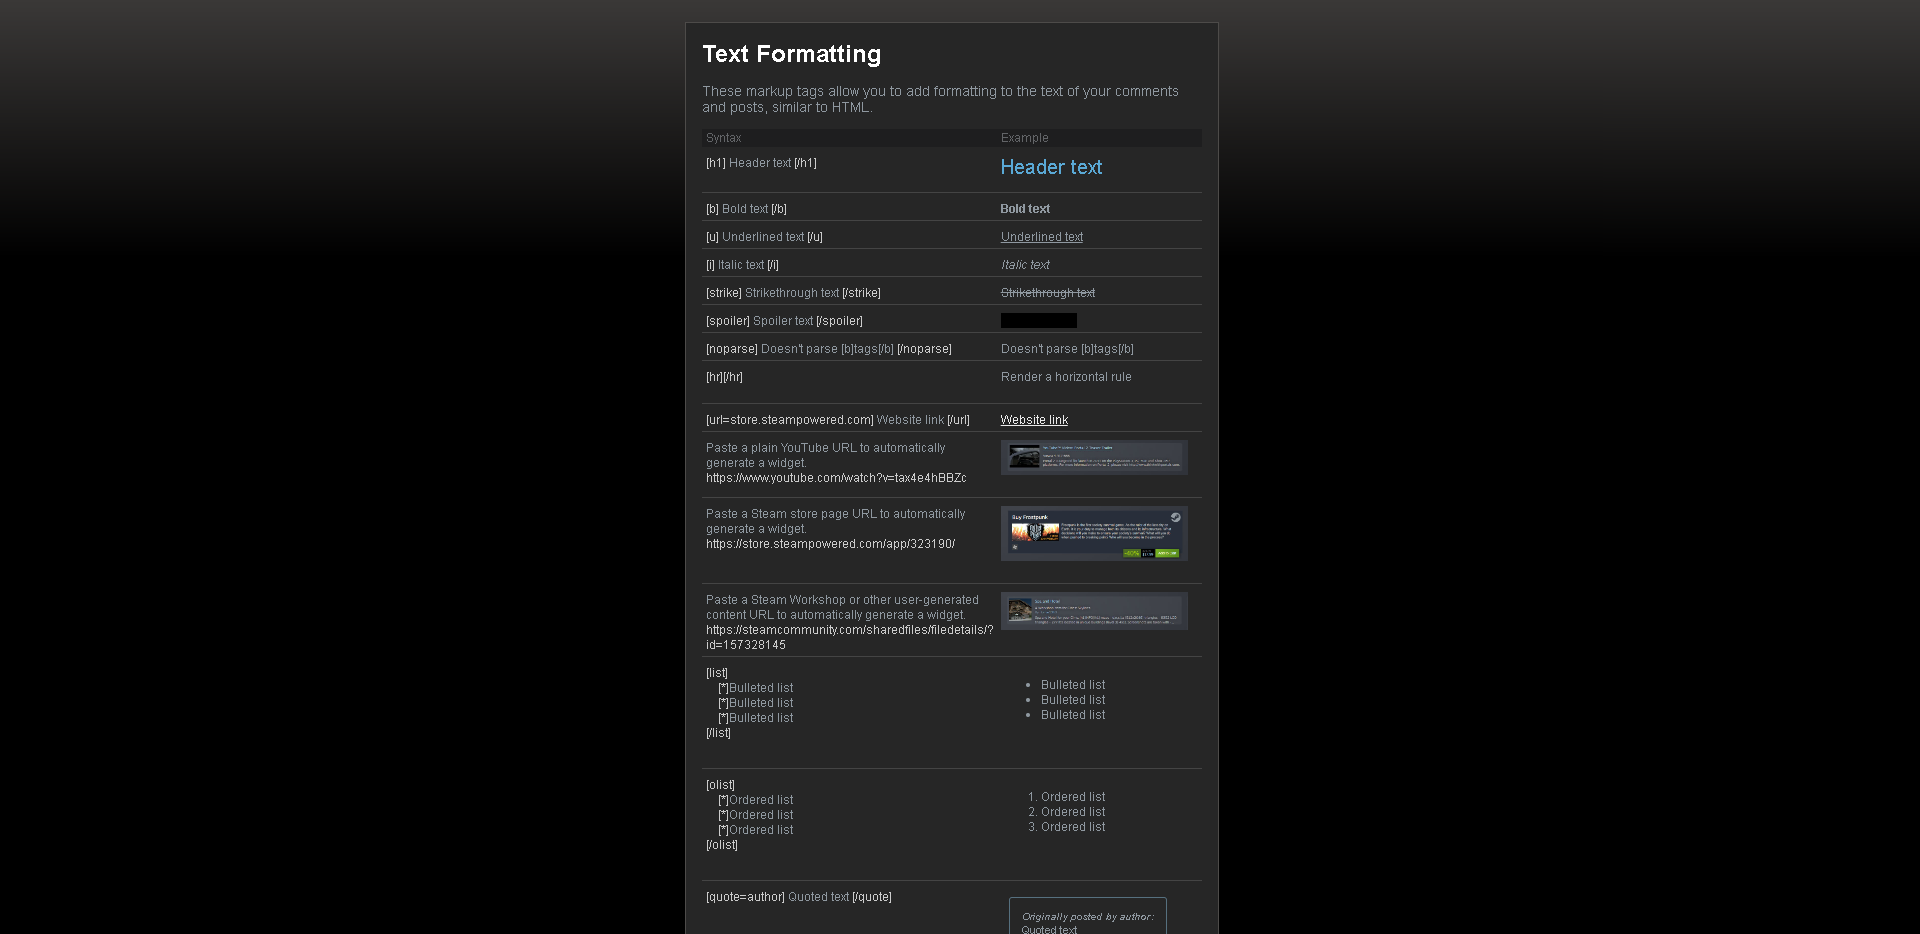 How to get your Steam Profile URL or Steam Username